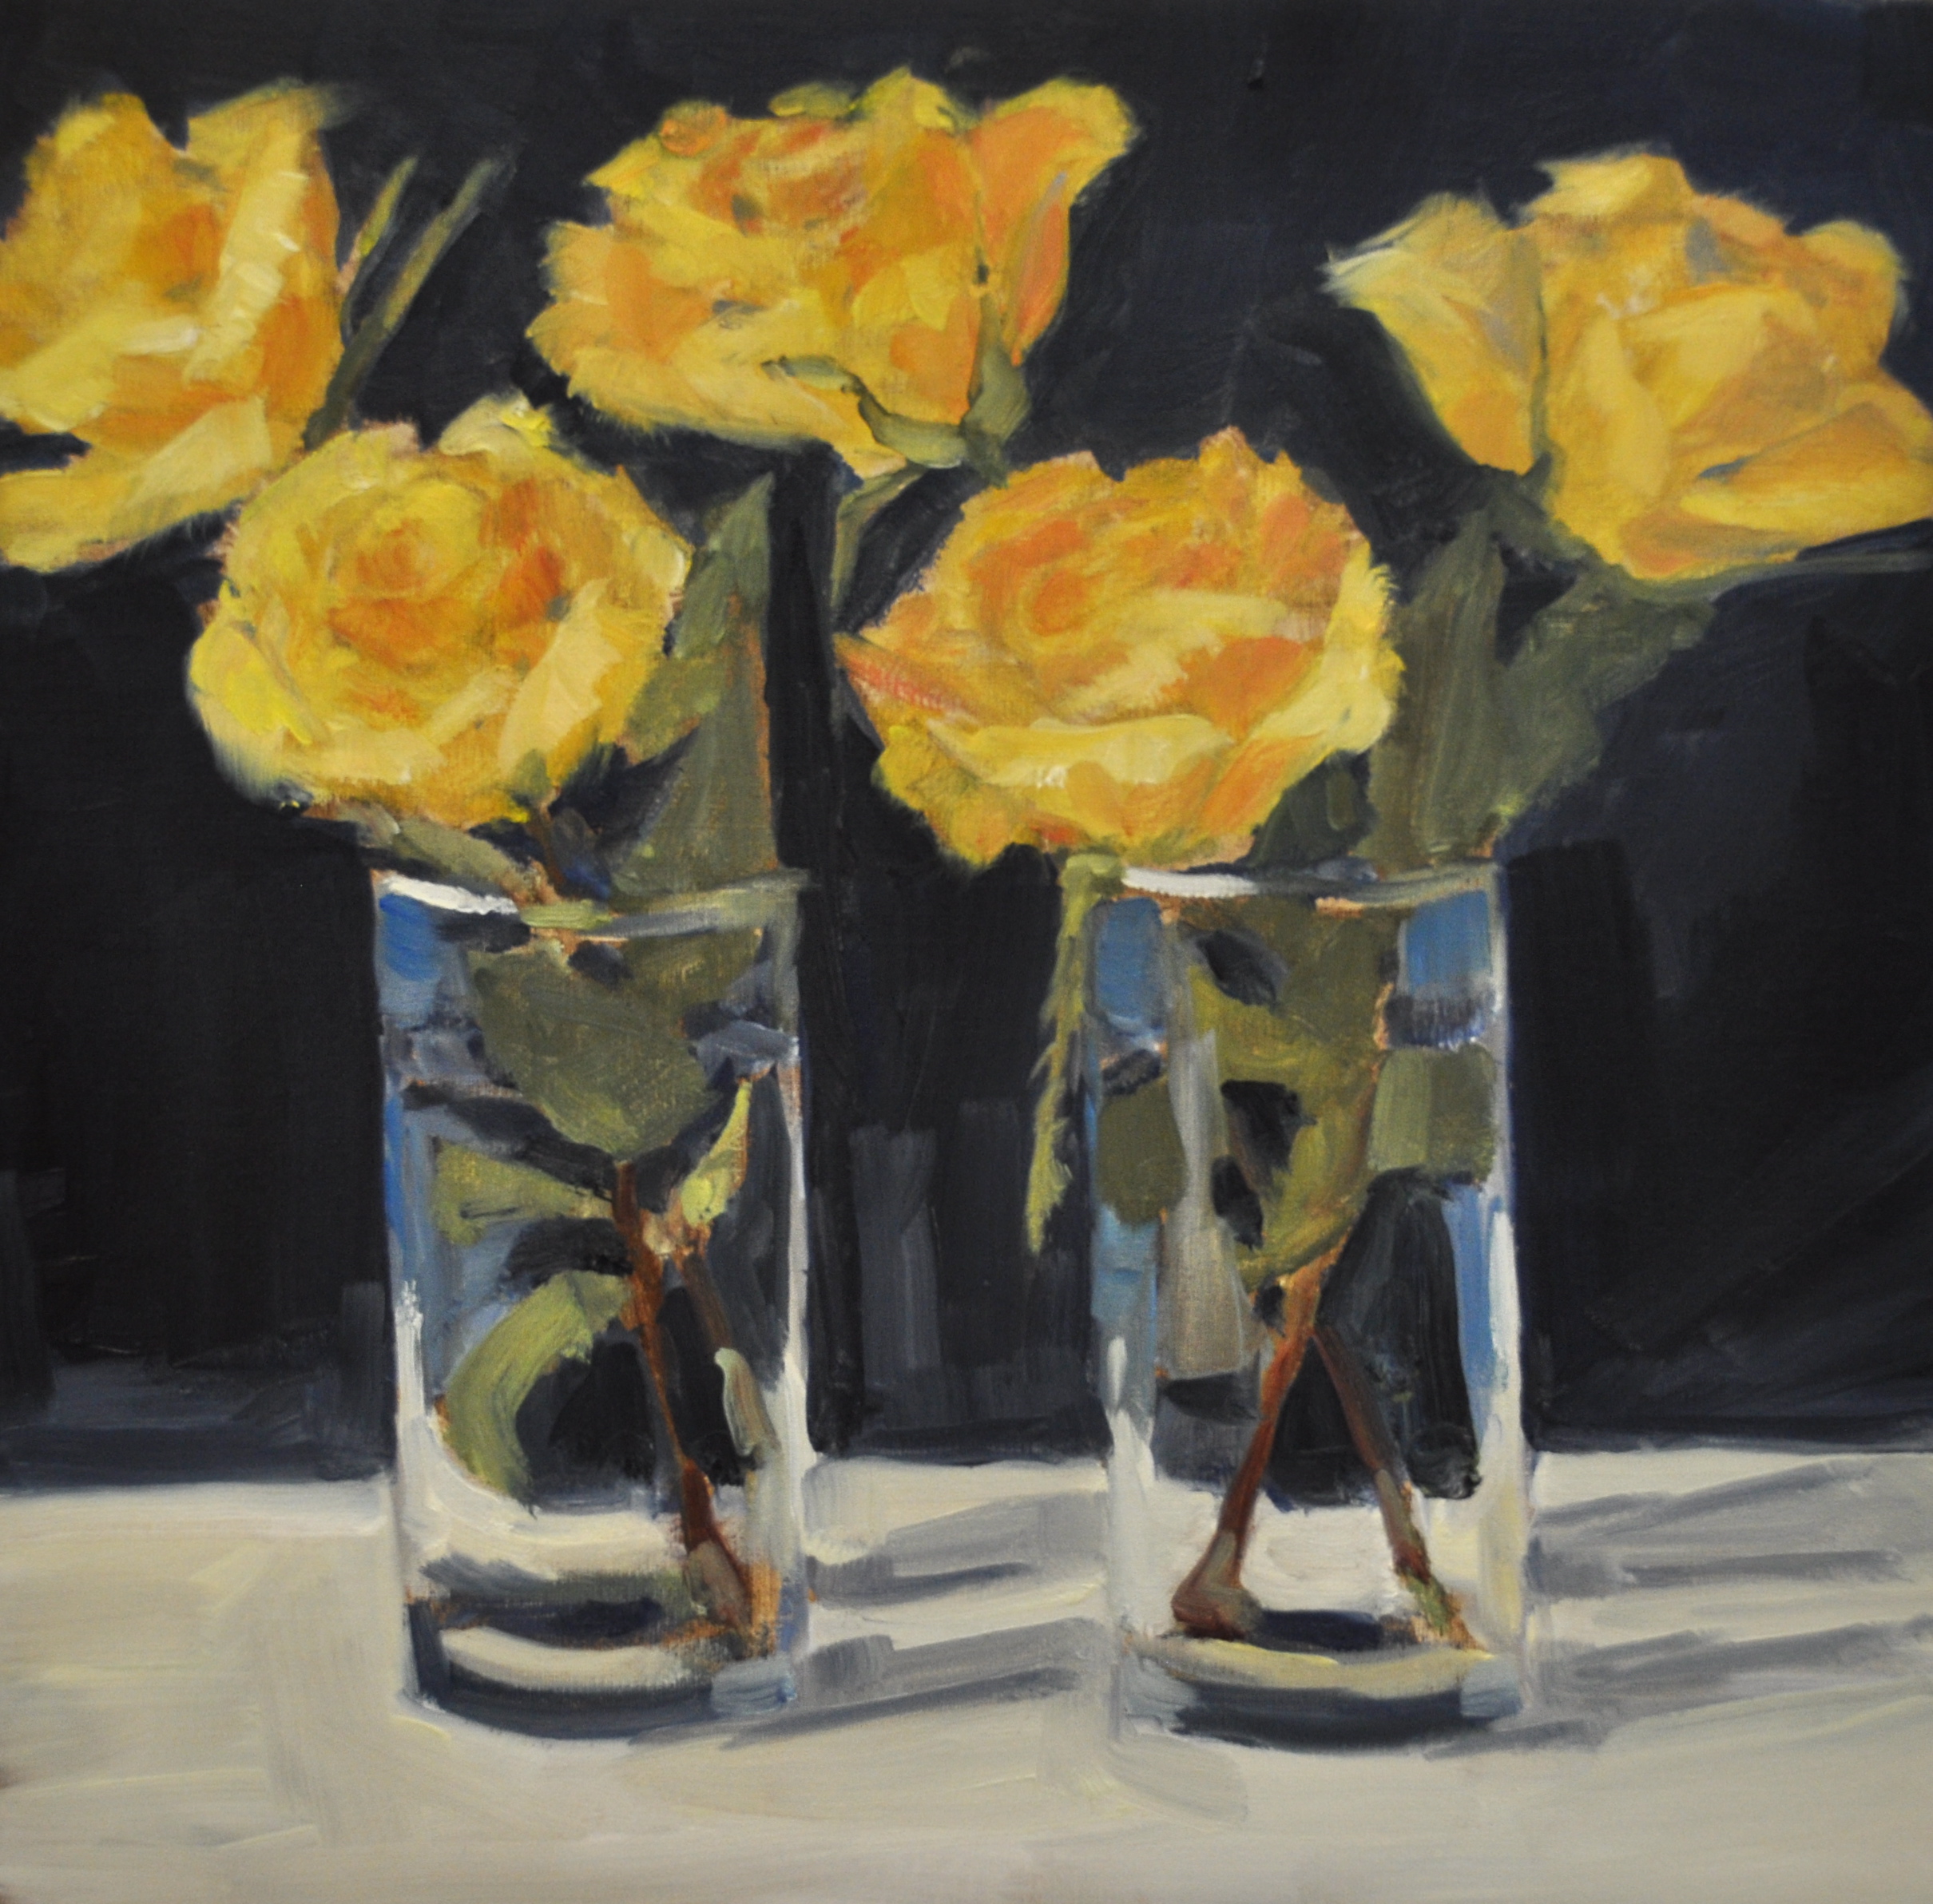 Five Yellows, Oil on Linen, 12 x 12, private collection